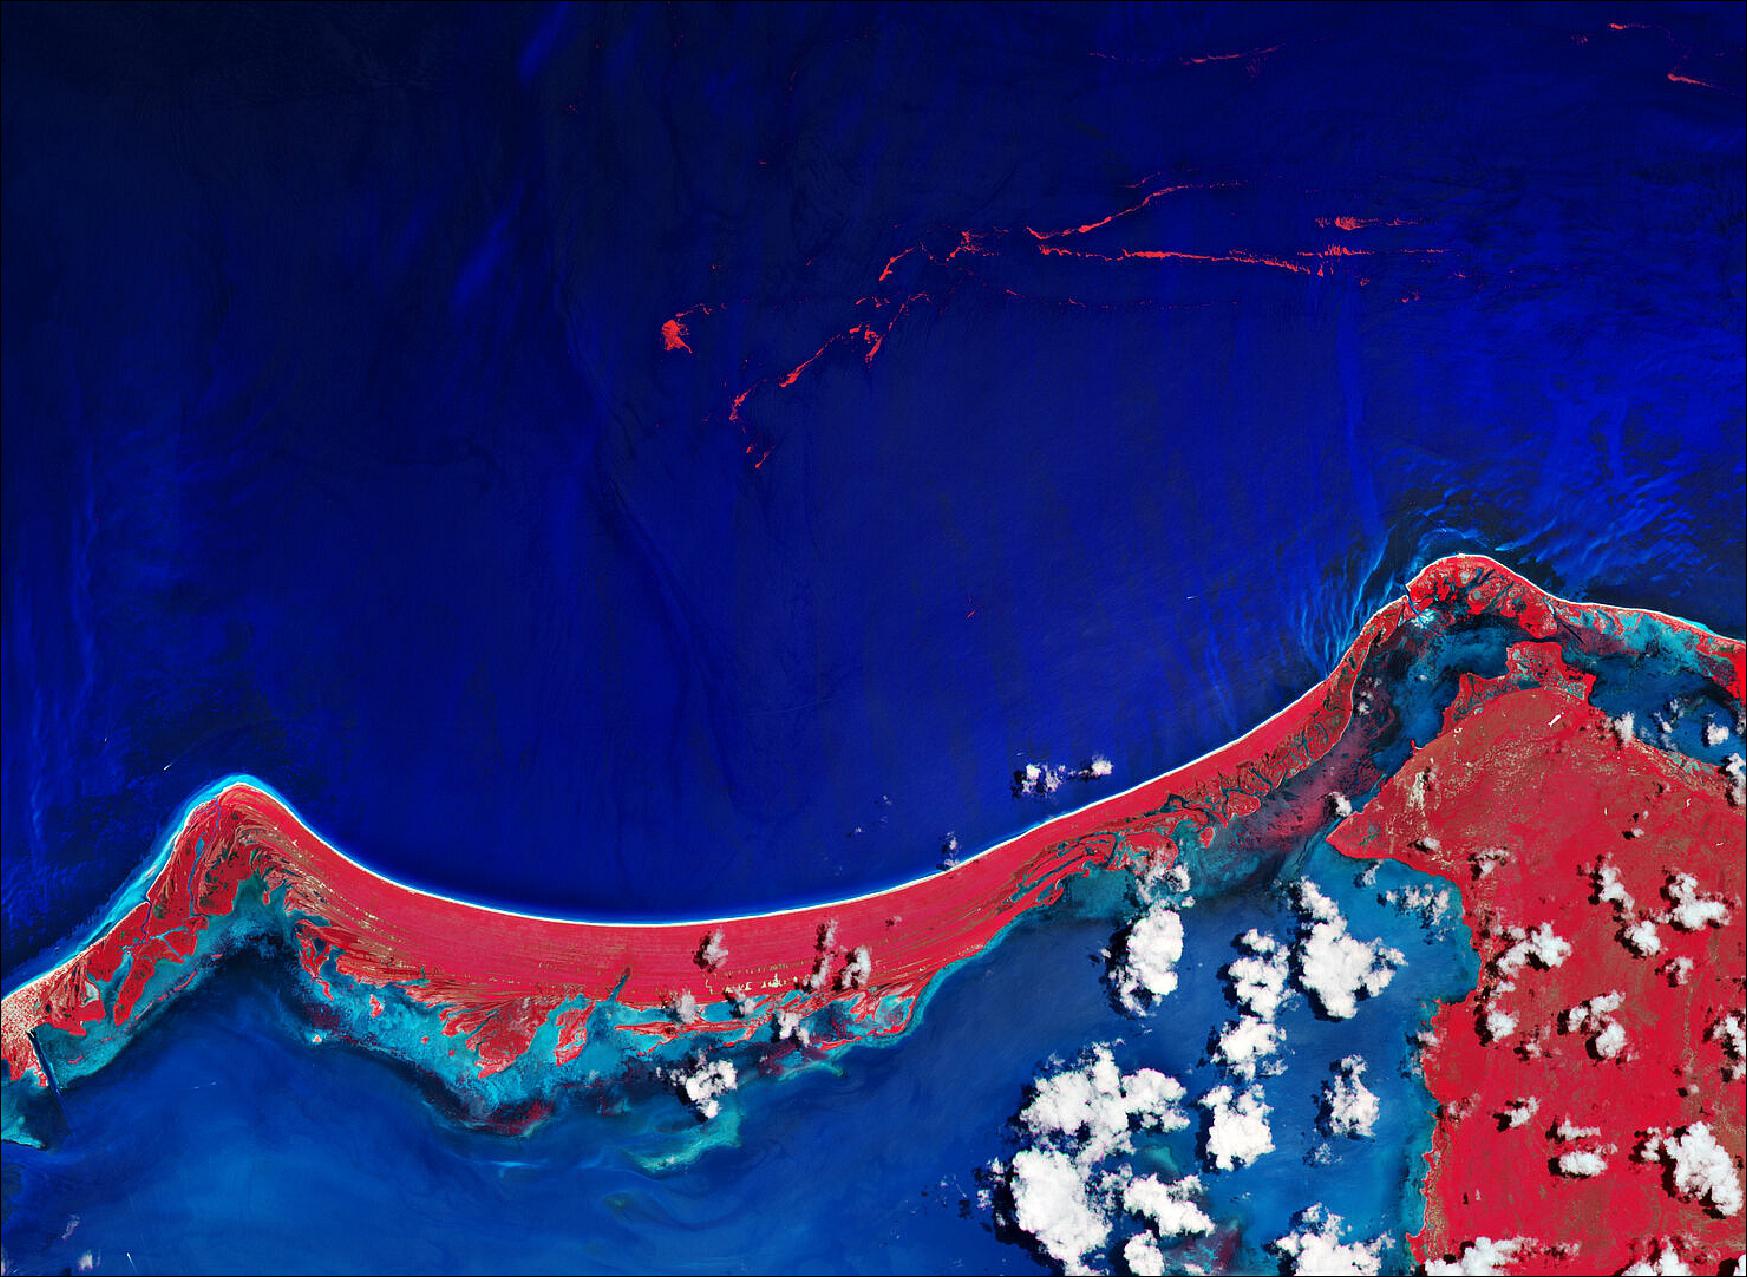 Figure 8: In this image of Sentinel-2, captured on 6 July 2019, the Sargassum floating in the sea can be seen in bright red. This image is also featured on the Earth from Space video program (image credit: ESA, the image contains modified Copernicus Sentinel data (2019), processed by ESA, CC BY-SA 3.0 IGO)